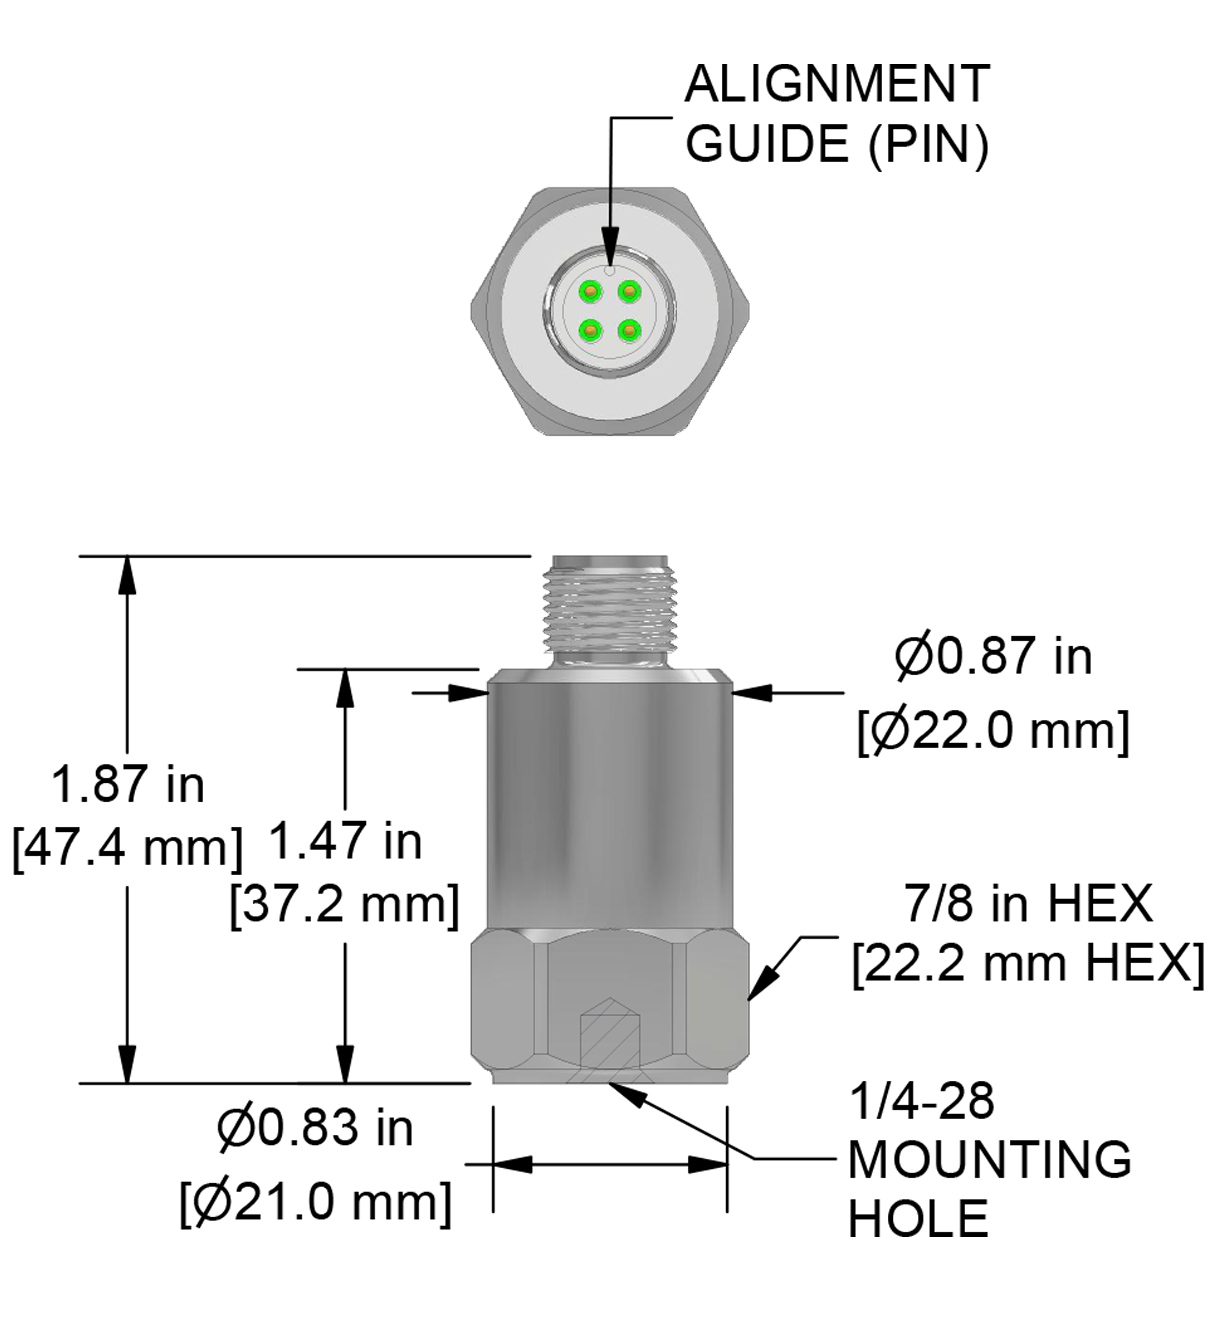 A drawing showing the dimensions and pin configuration of a CTC AC102-M12A industrial accelerometer.